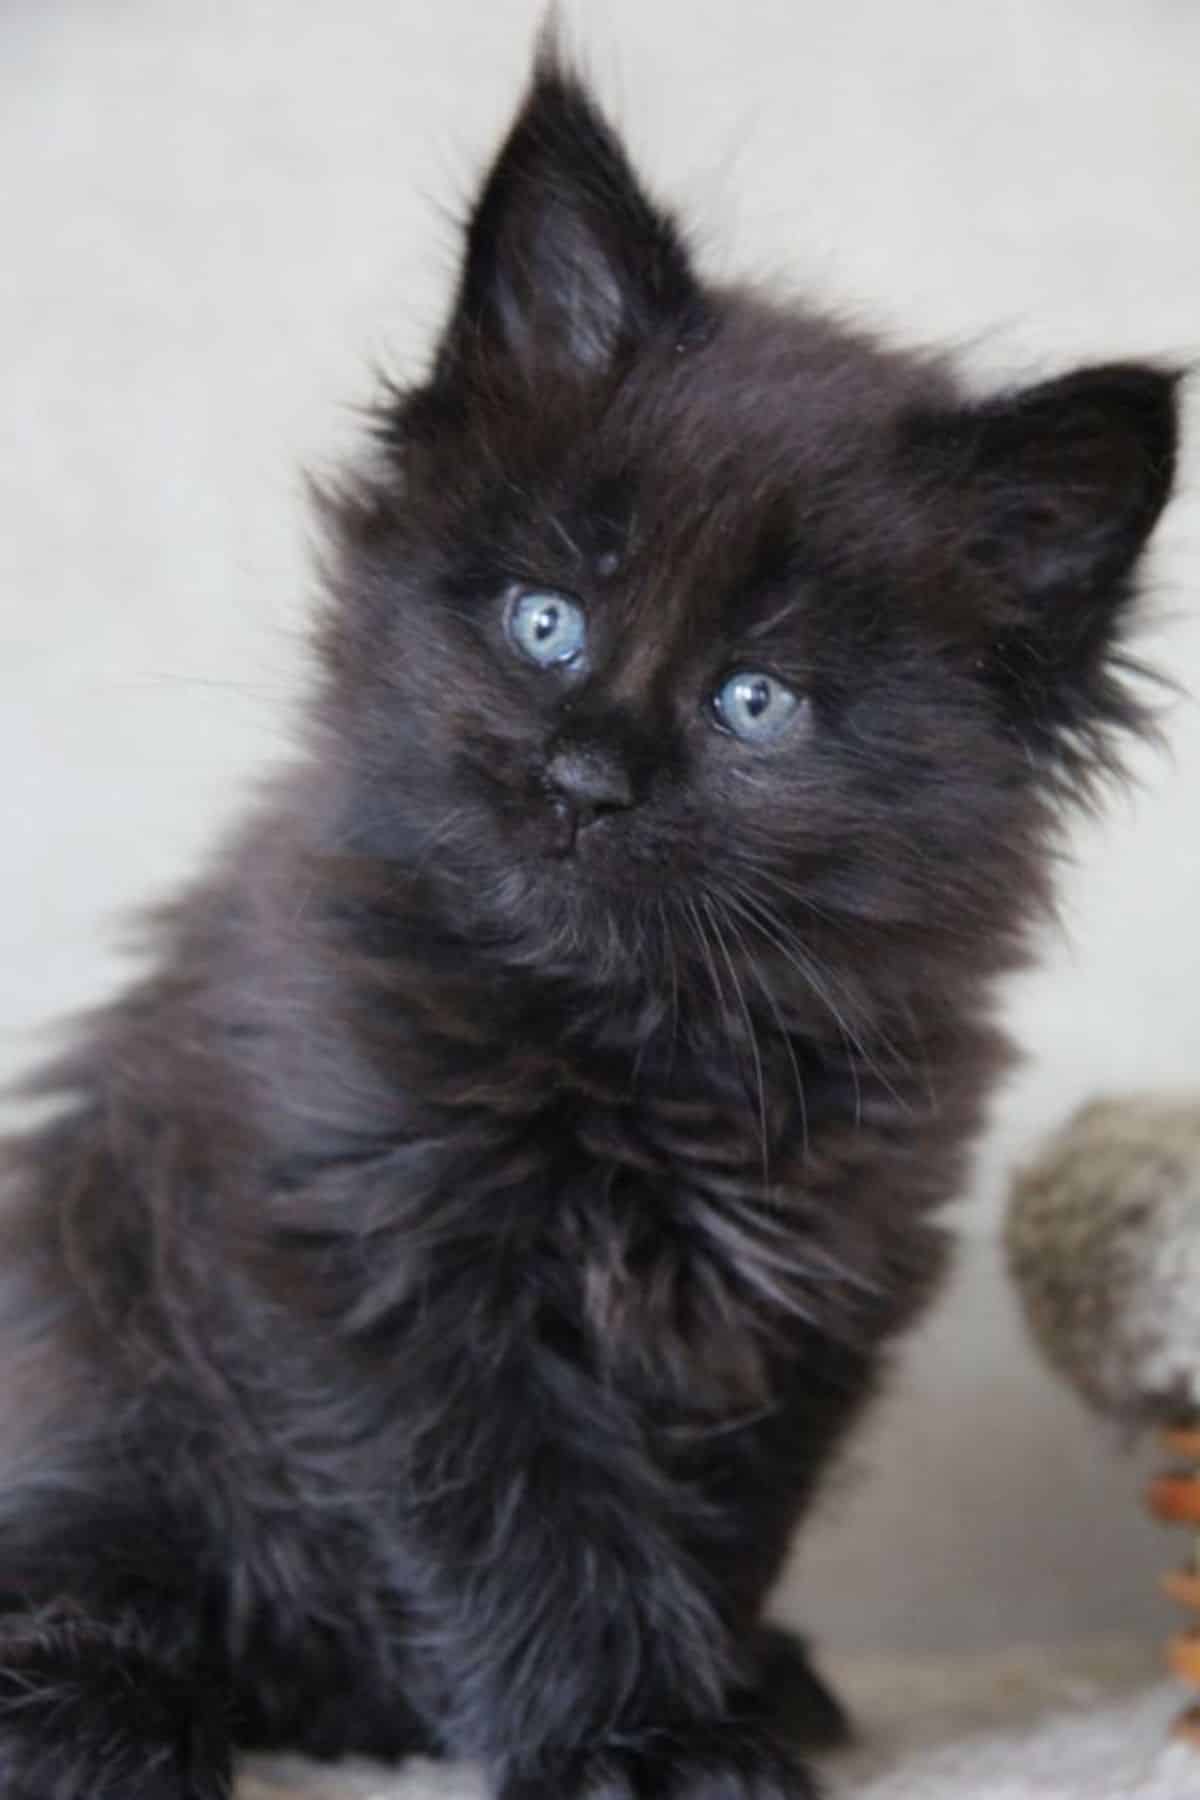 A fluffy black maine coon kitten with blue eyes.